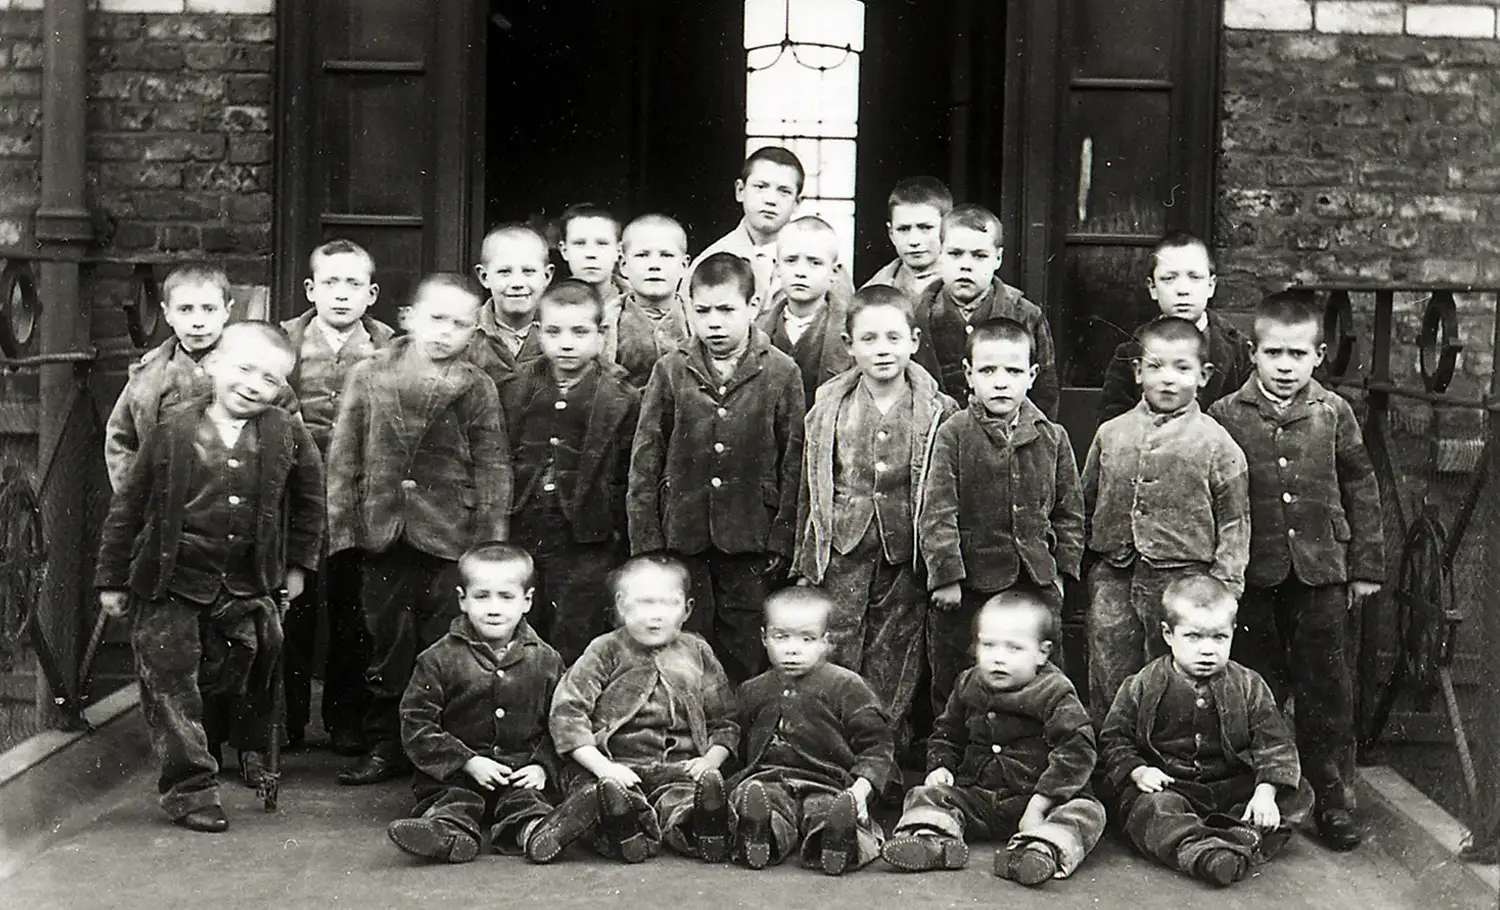 Twenty-three boys ranging from toddlers to about twelve years old are arranged for this group photograph. They all have their heads shaved and are wearing identical work clothes. The youngest sit in front, and one child appears to be missing a leg and using a cane. 